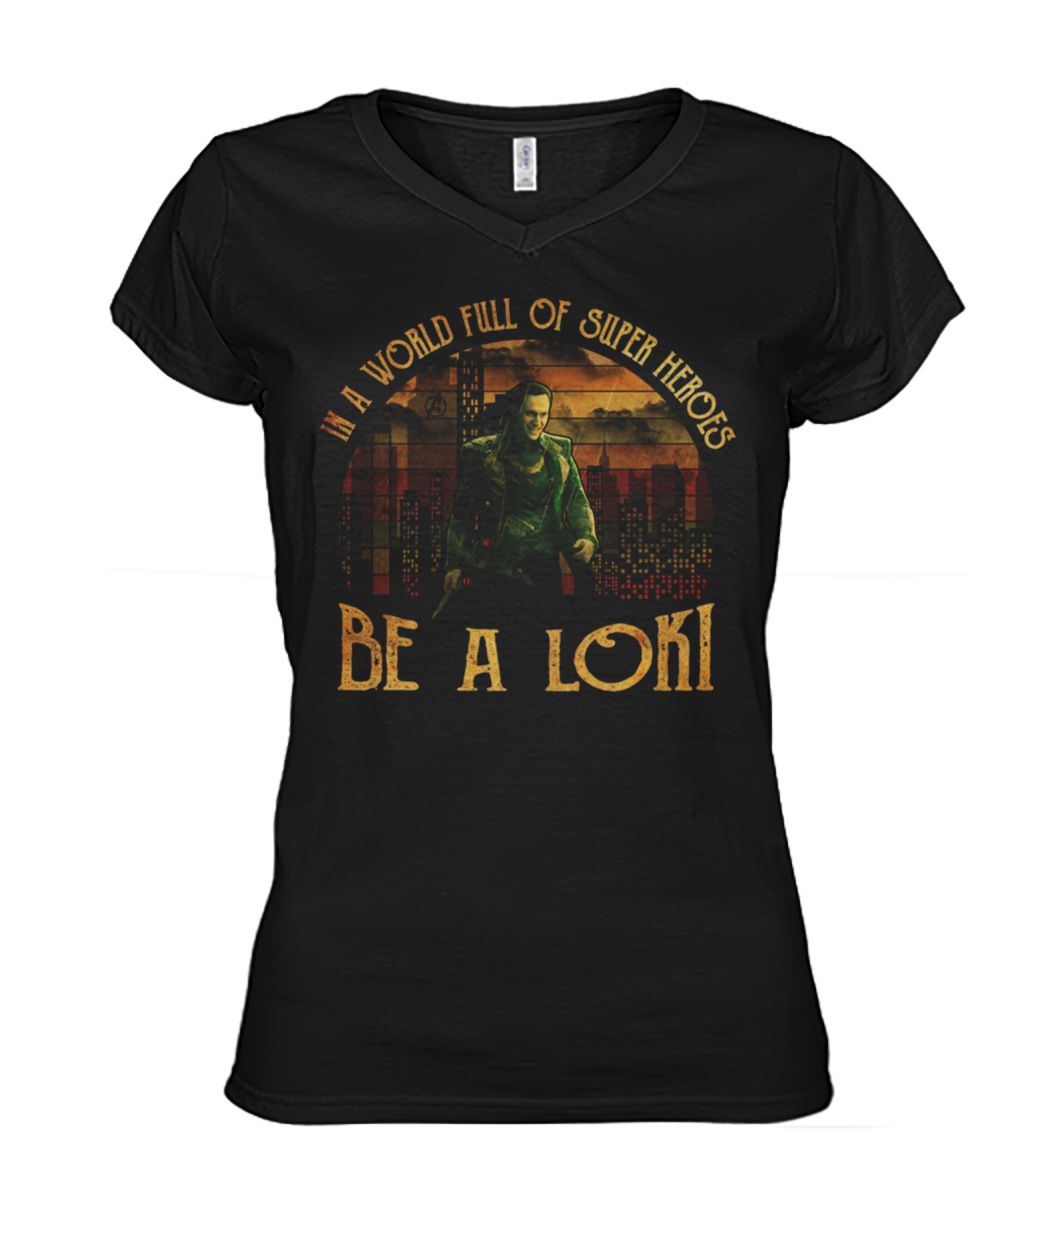 Vintage in a world full of super heroes be a loki women's v-neck